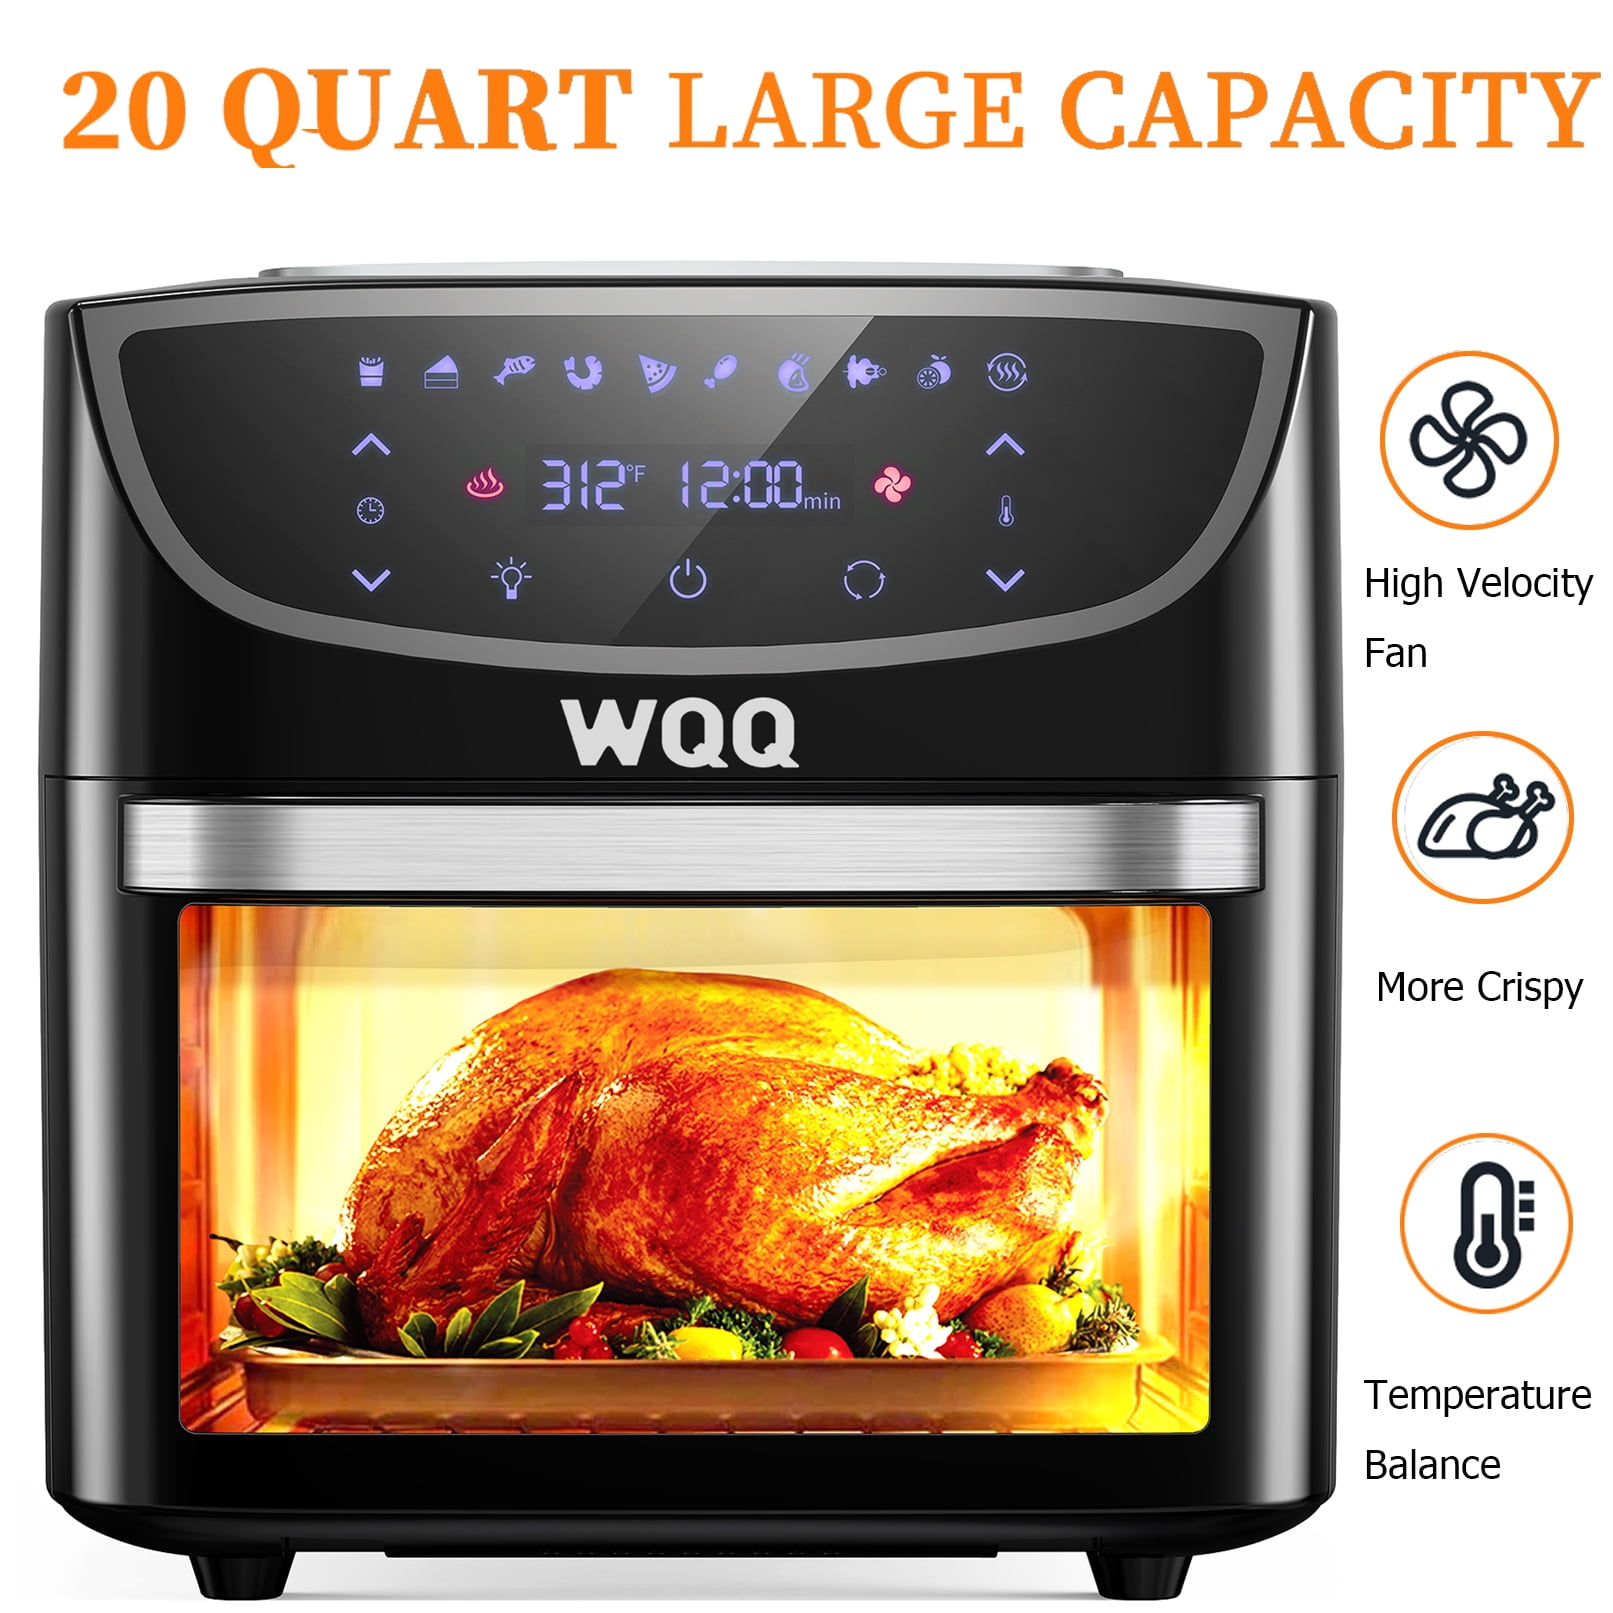 HotKing Air Fryer Oven 20 Quart Large, 10-in-1 Airfryer Rotisserie  Dehydrator Toaster Oven Combo with Racks, XL Digital Countertop Air Fryer  for